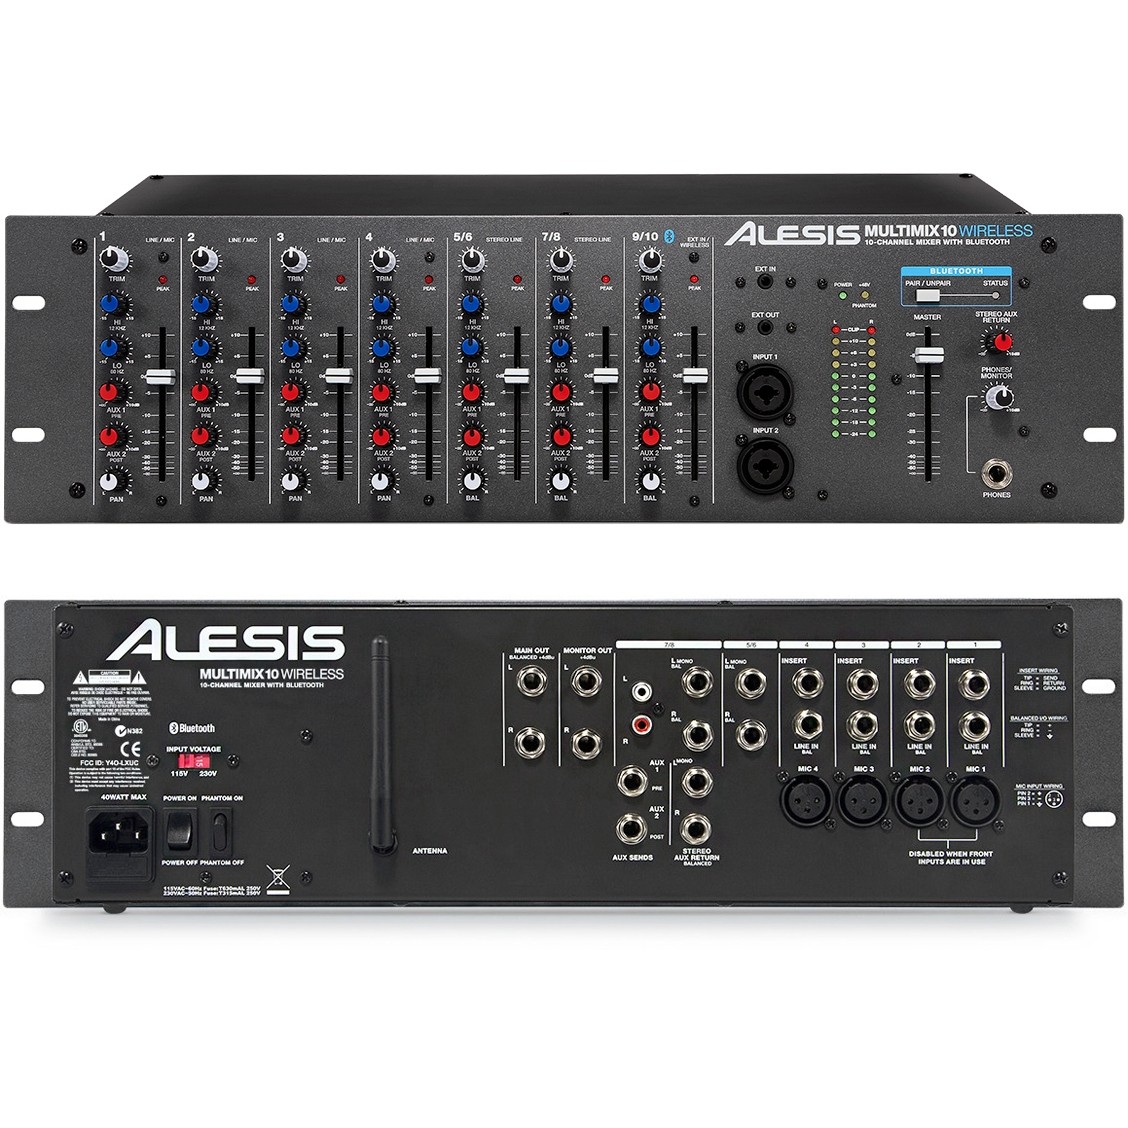 Alesis MultiMix 10 Wireless Mixer with Bluetooth